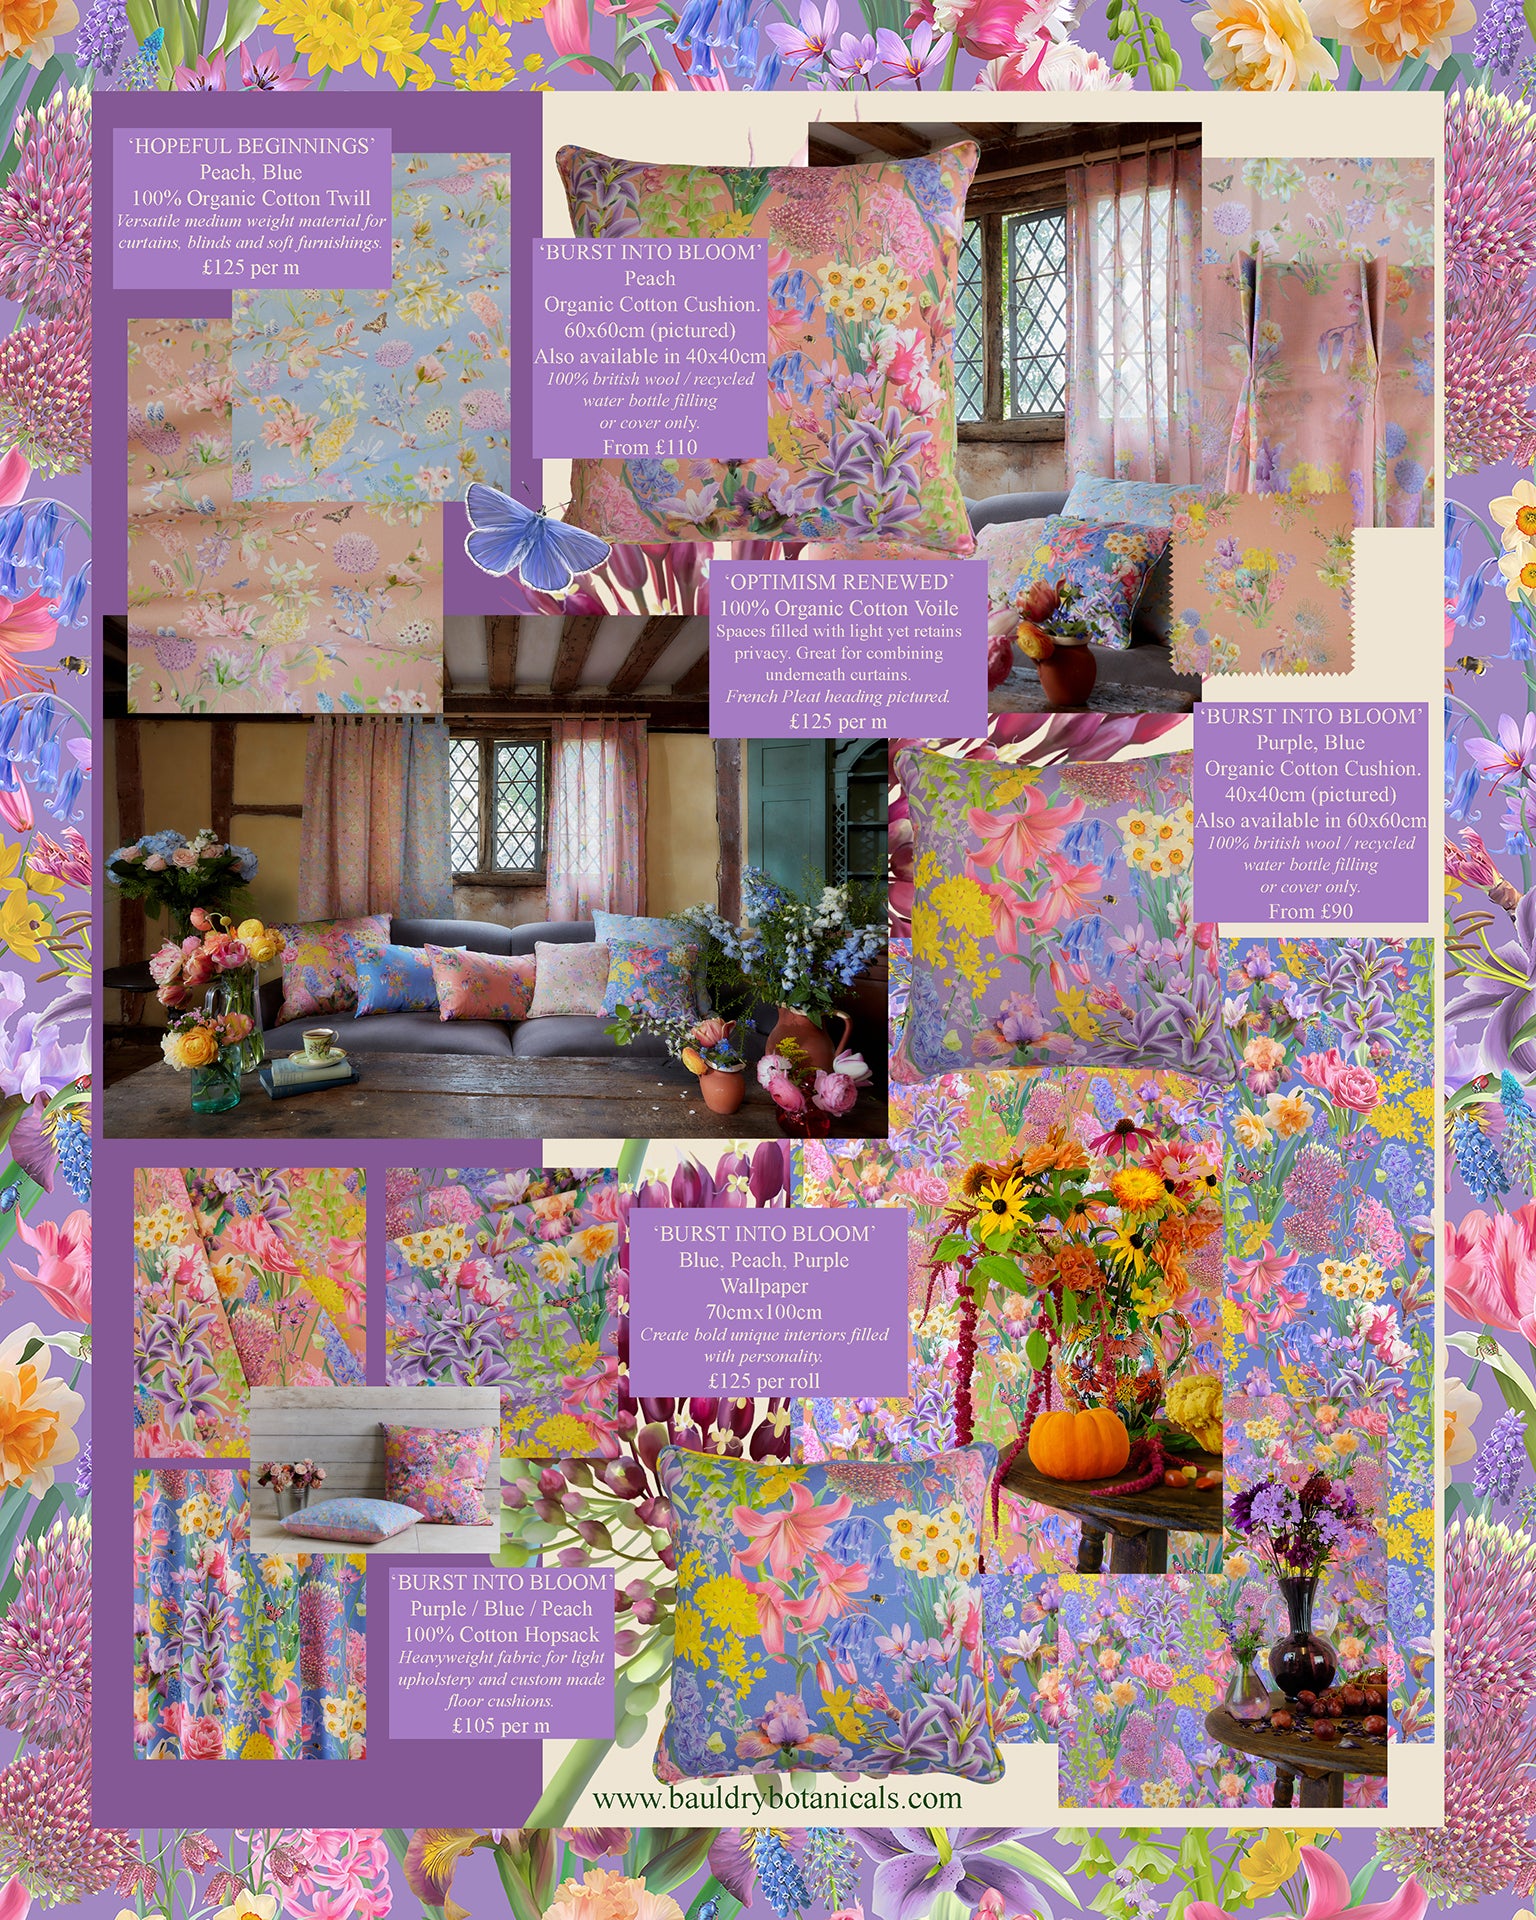 bold colourful interior design inspiration using floral pattern wallpaper, cushions and fabrics by bauldry botanicals